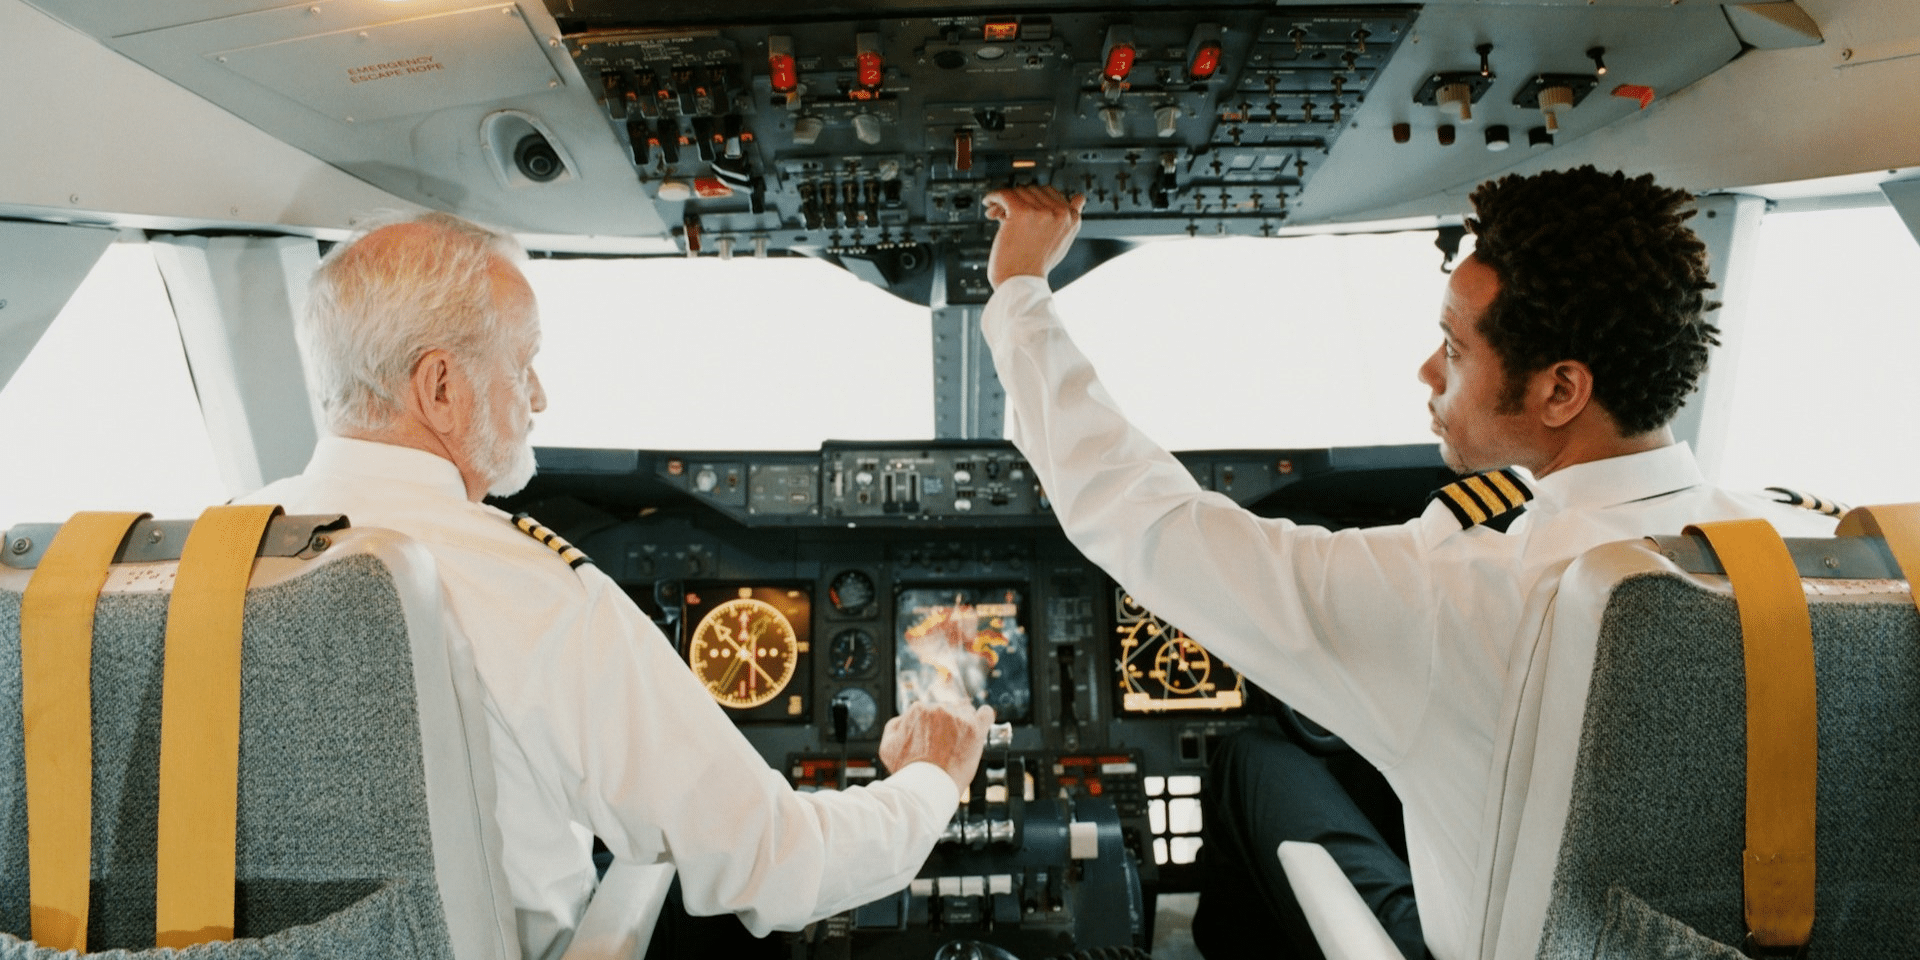 The Challenges of Training to Be a Pilot